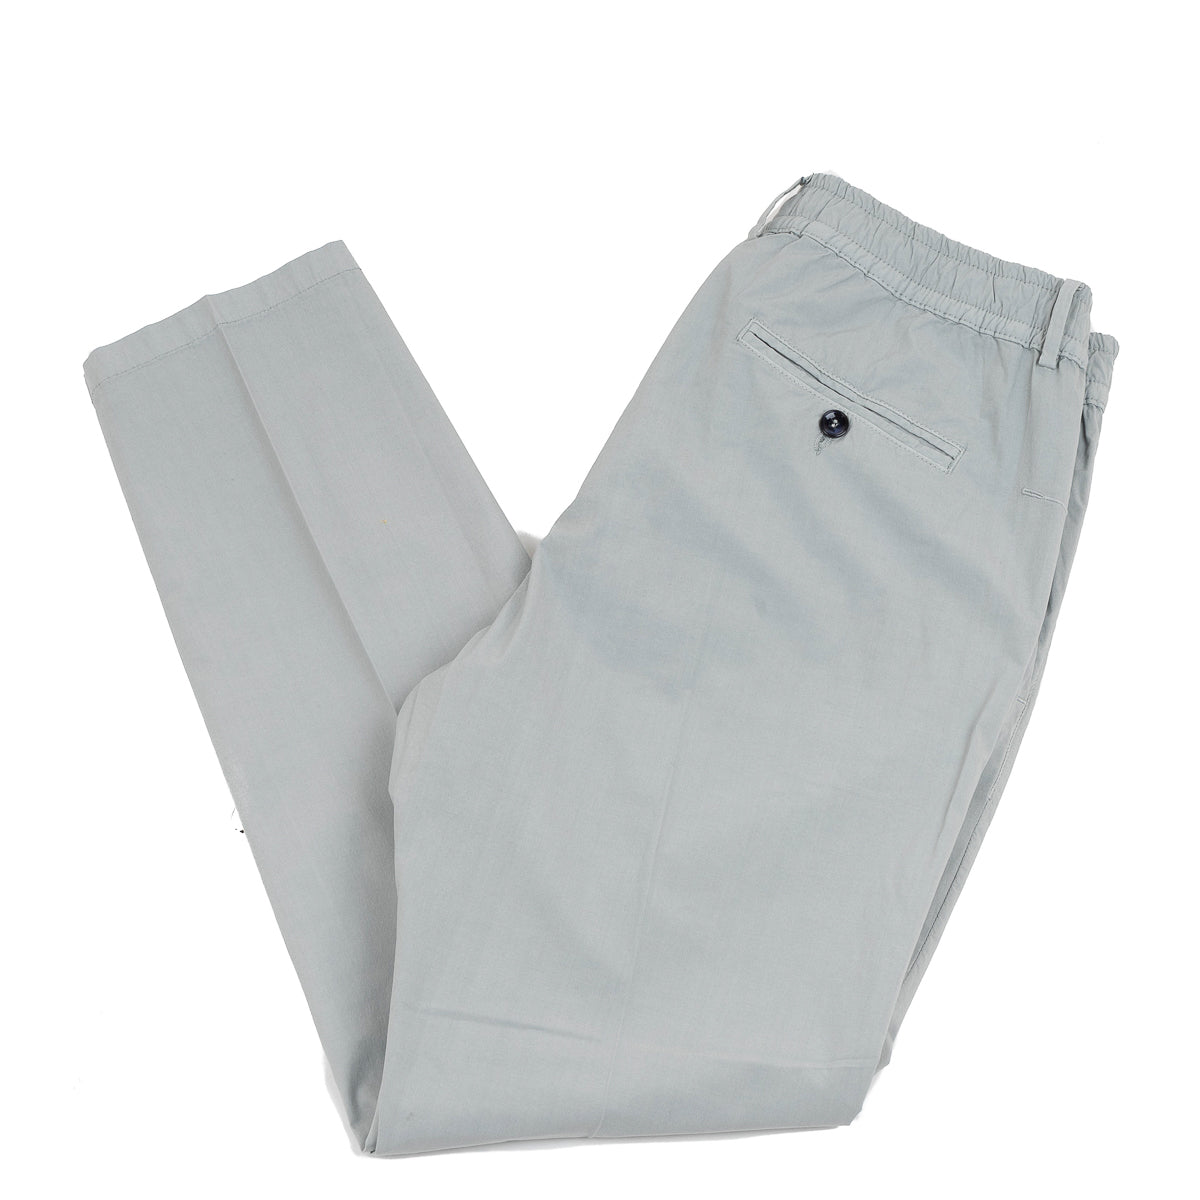 Mitte Trousers - Light Grey